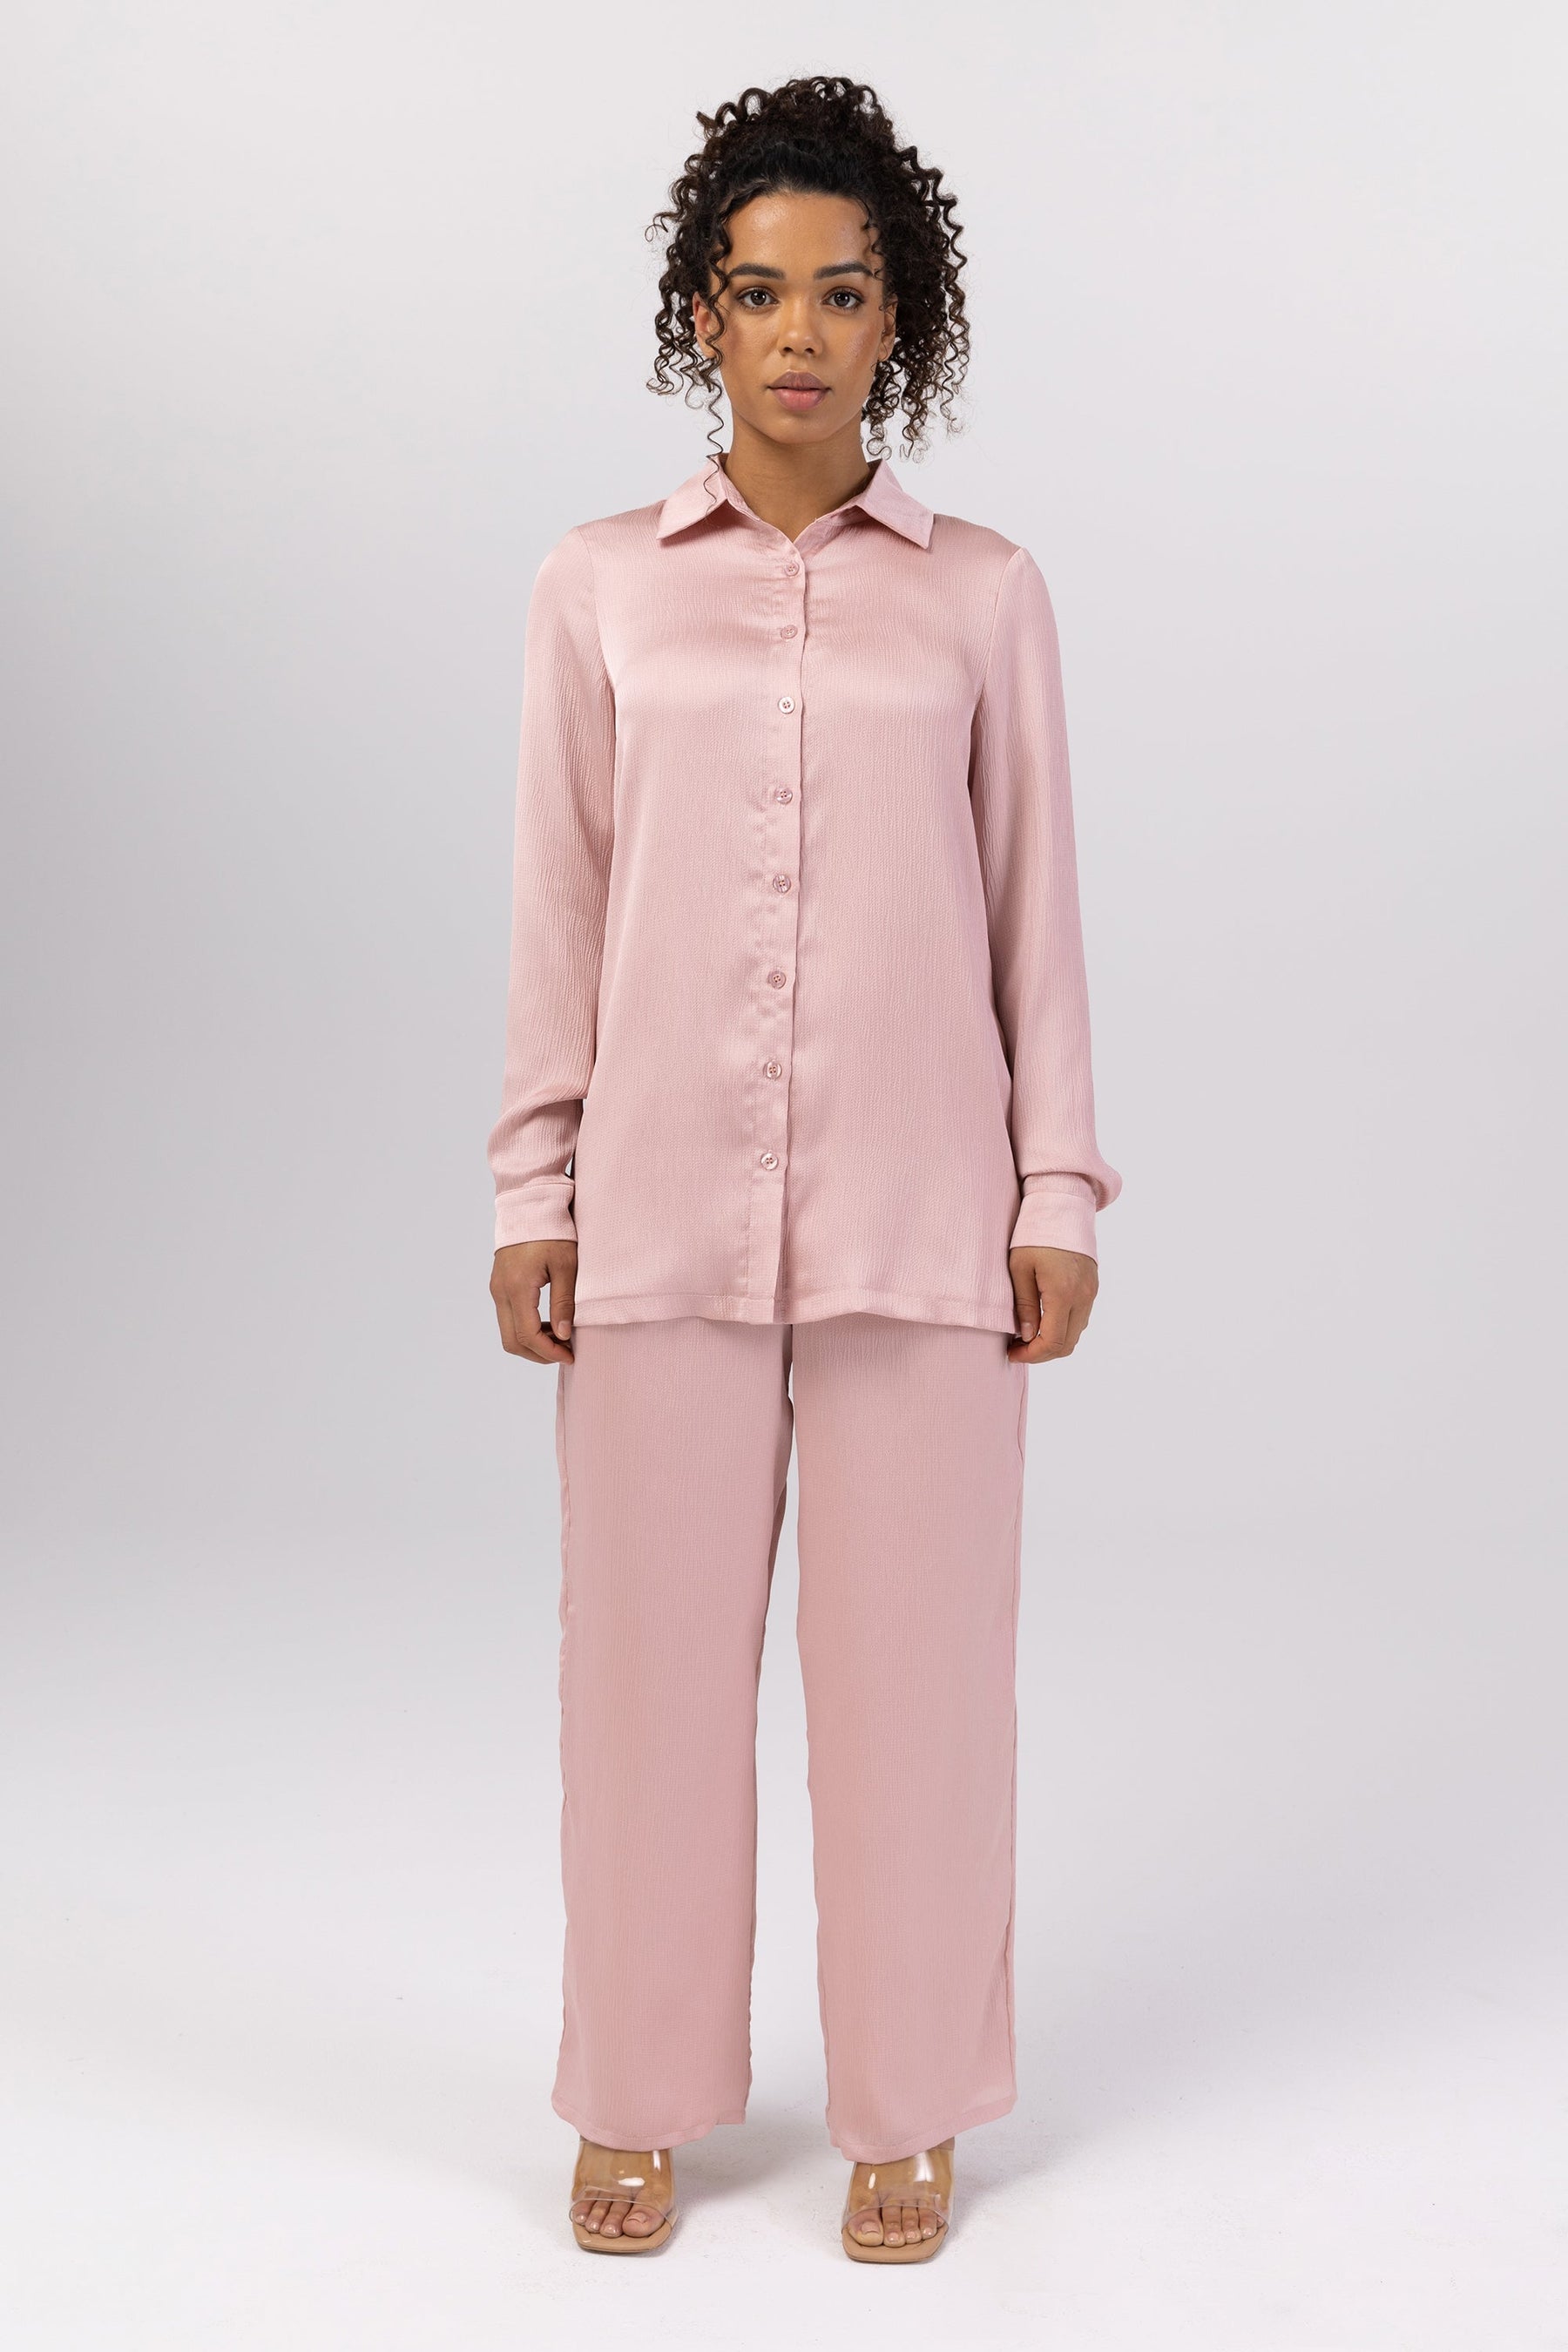 Katia Textured Button Down Top - Dusty Pink epschoolboard 